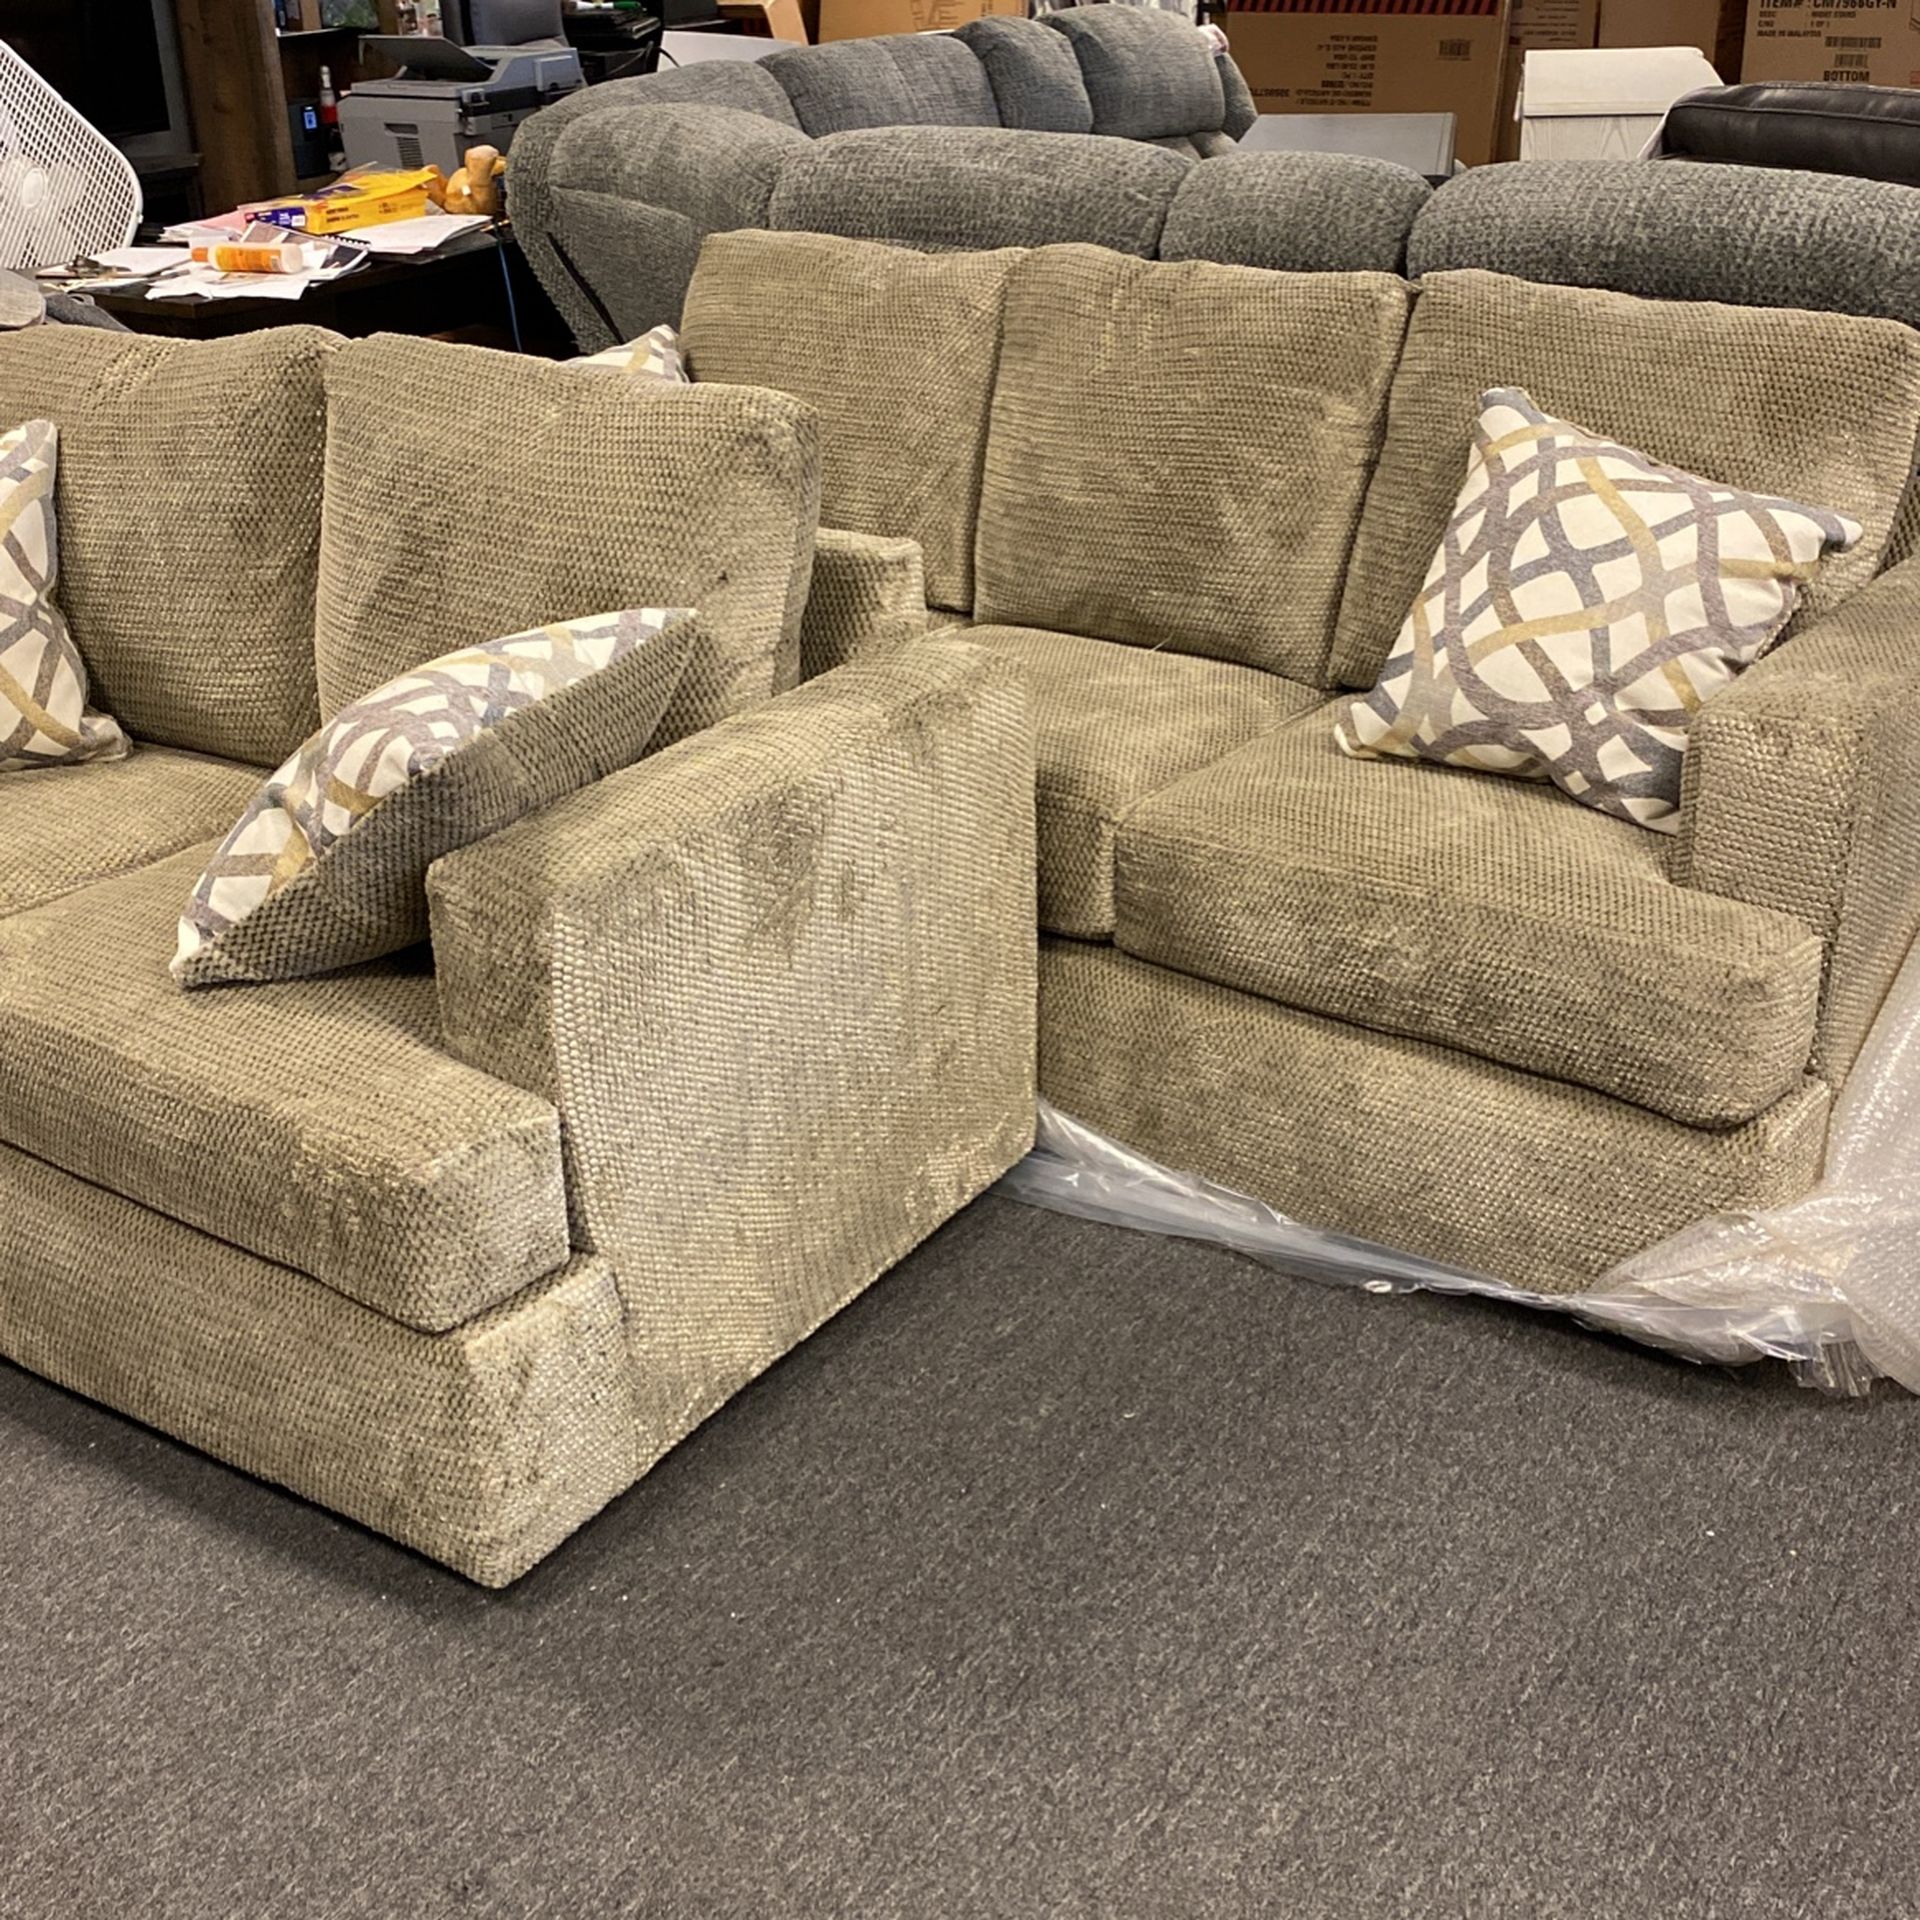 Clearance Sofa And Loveseat Brand New Must sell Can Deliver. 